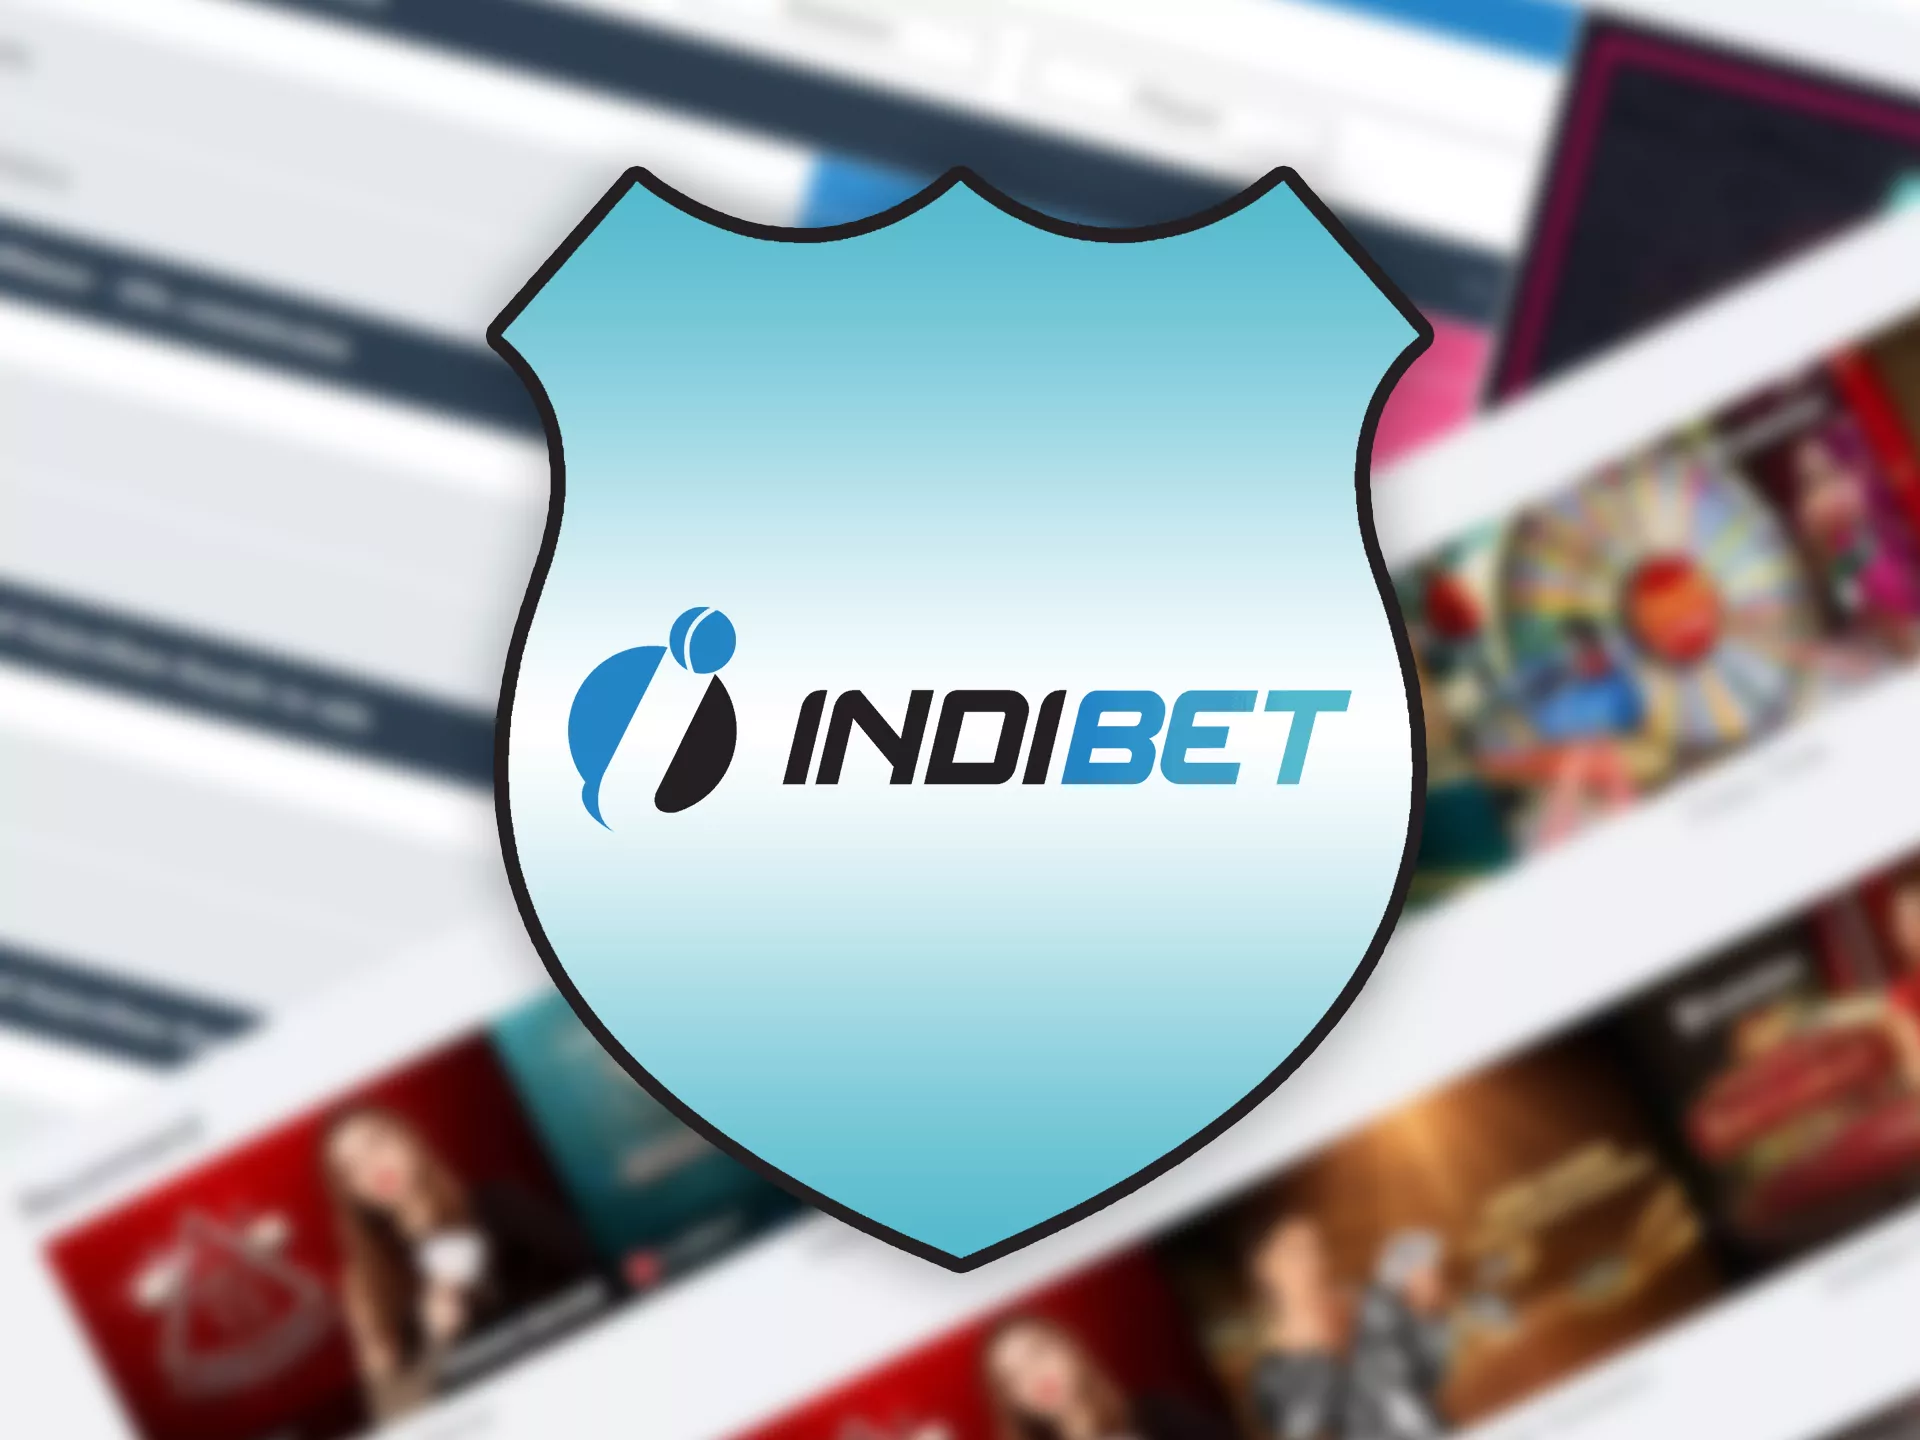 Indibet app secures all of your information.